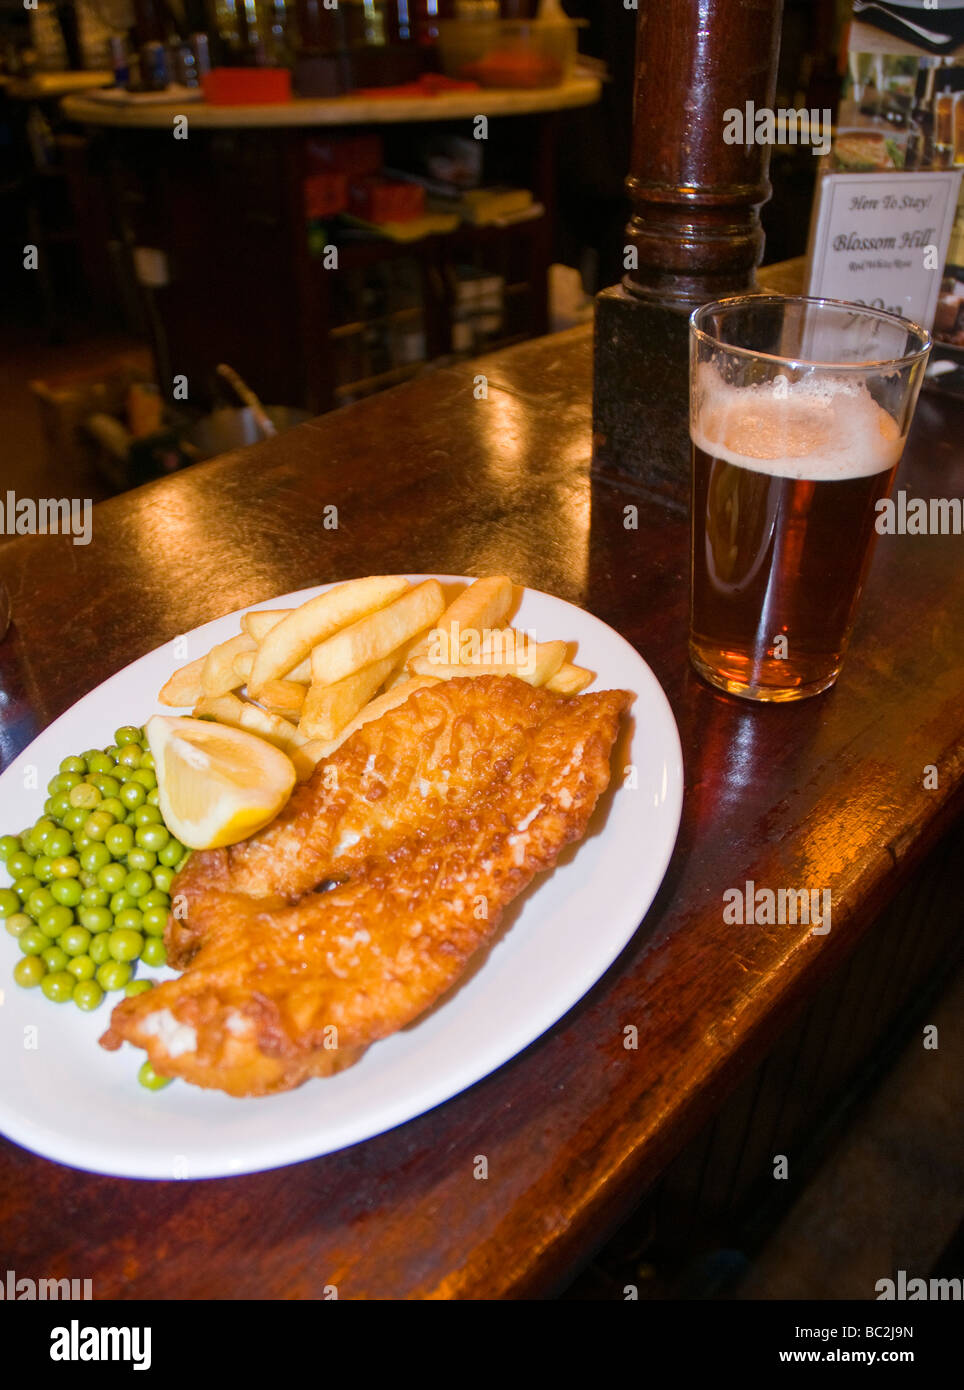 dh Scottish pub lunch HORSE SHOE BAR GLASGOW SCOTLAND Food bar meal battered supper fish chips peas pint of beer plate uk Stock Photo